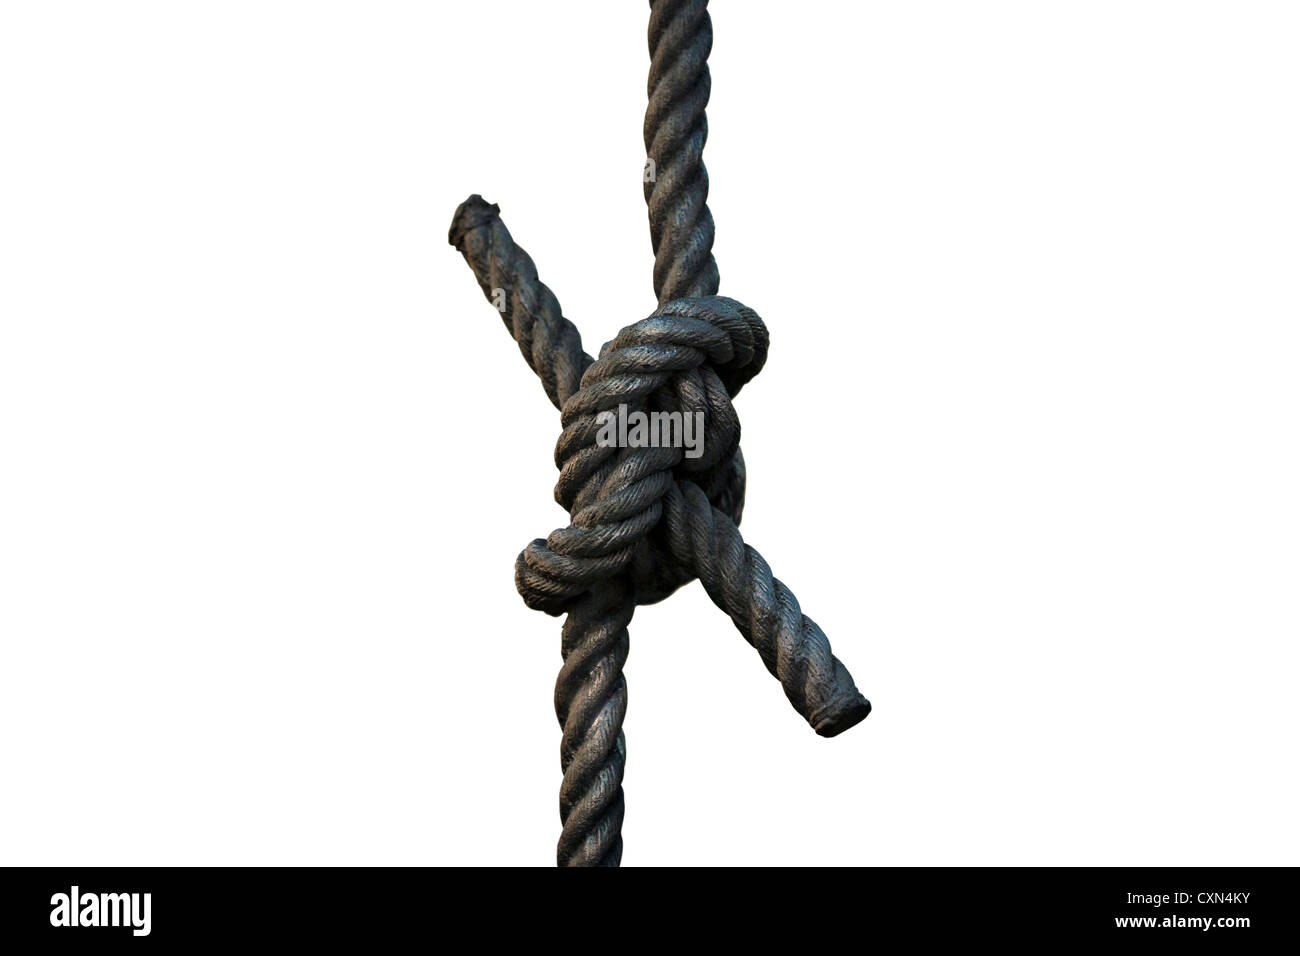 Cut Out. Granny Knot rope sculpture on white background Stock Photo